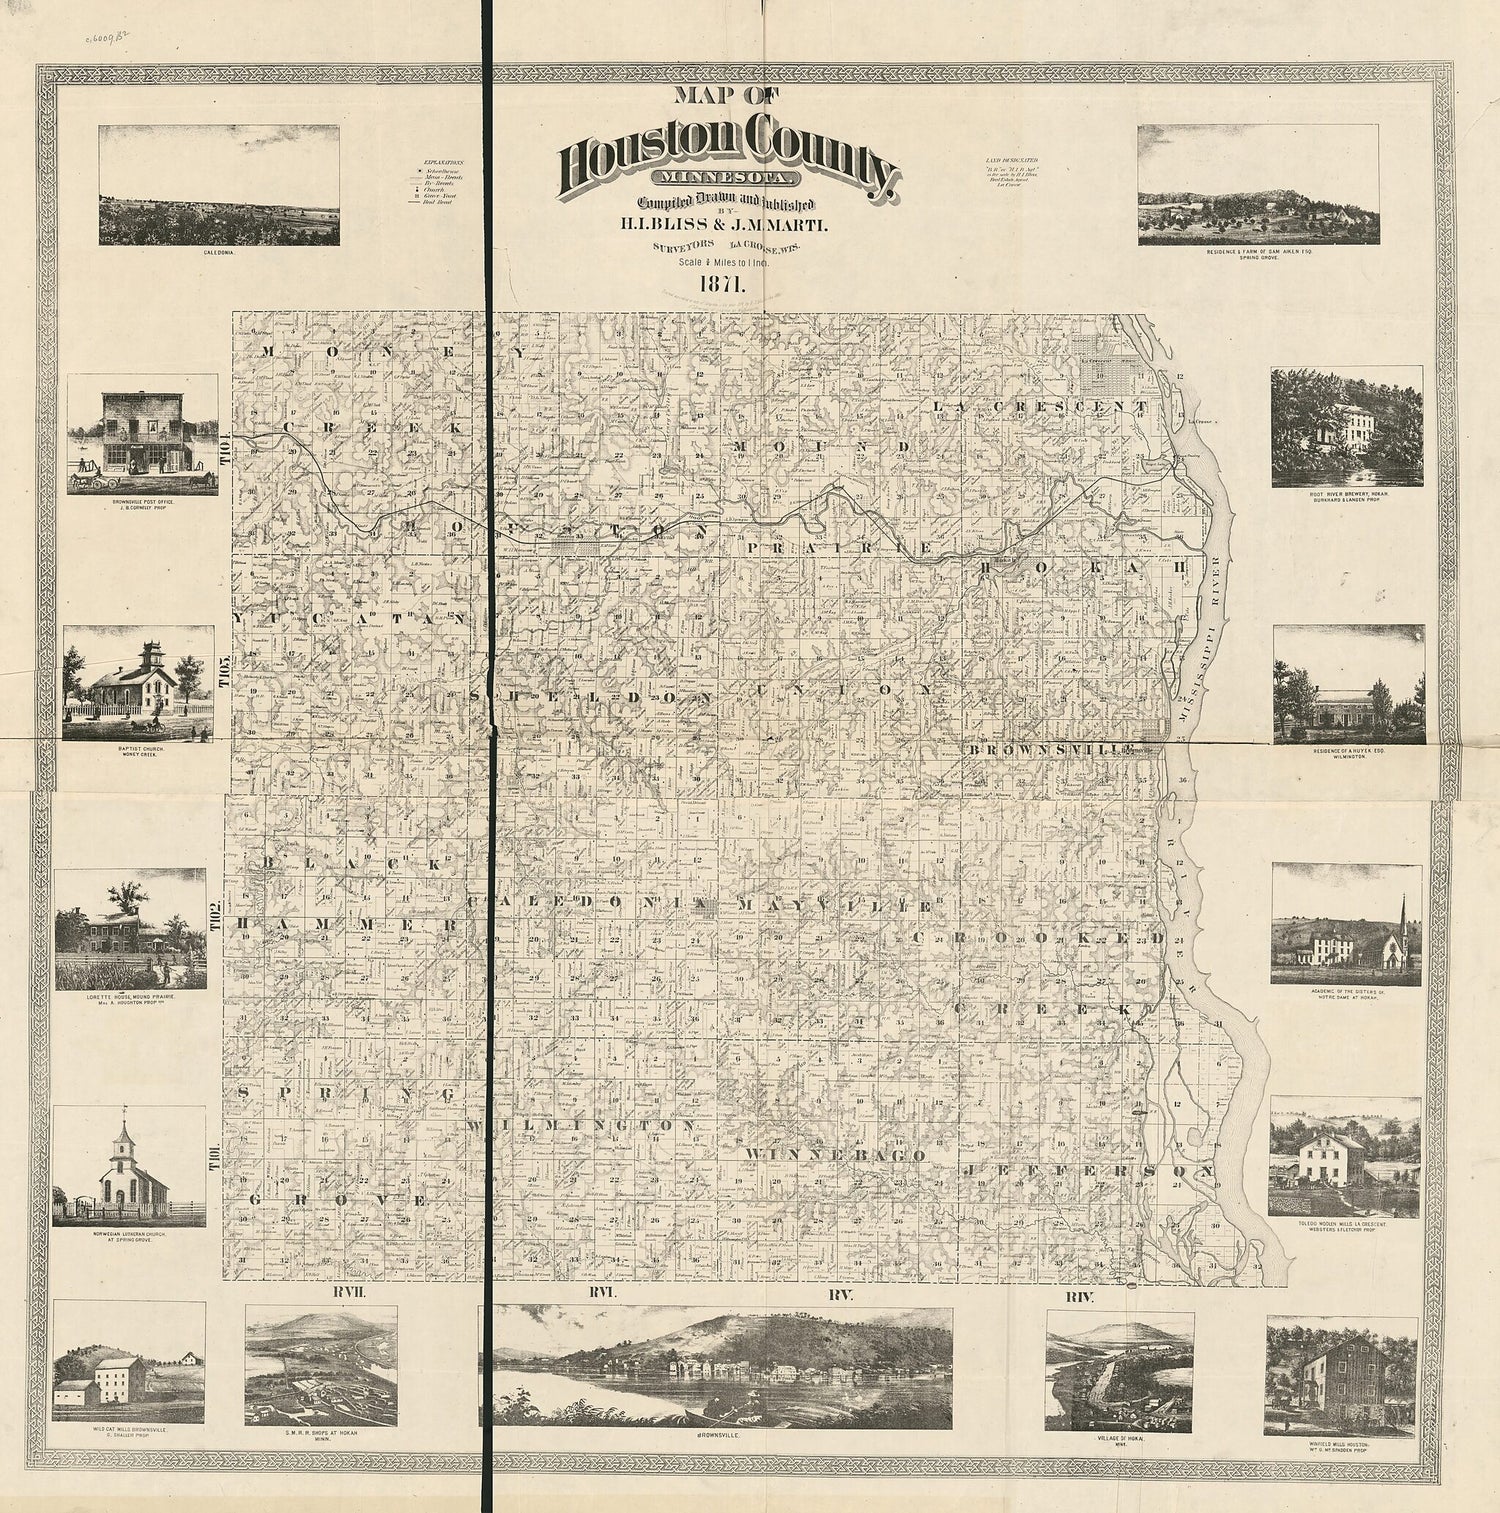 This old map of Map of Houston County, Minnesota from 1871 was created by Henry I. Bliss, J. M. Marti in 1871